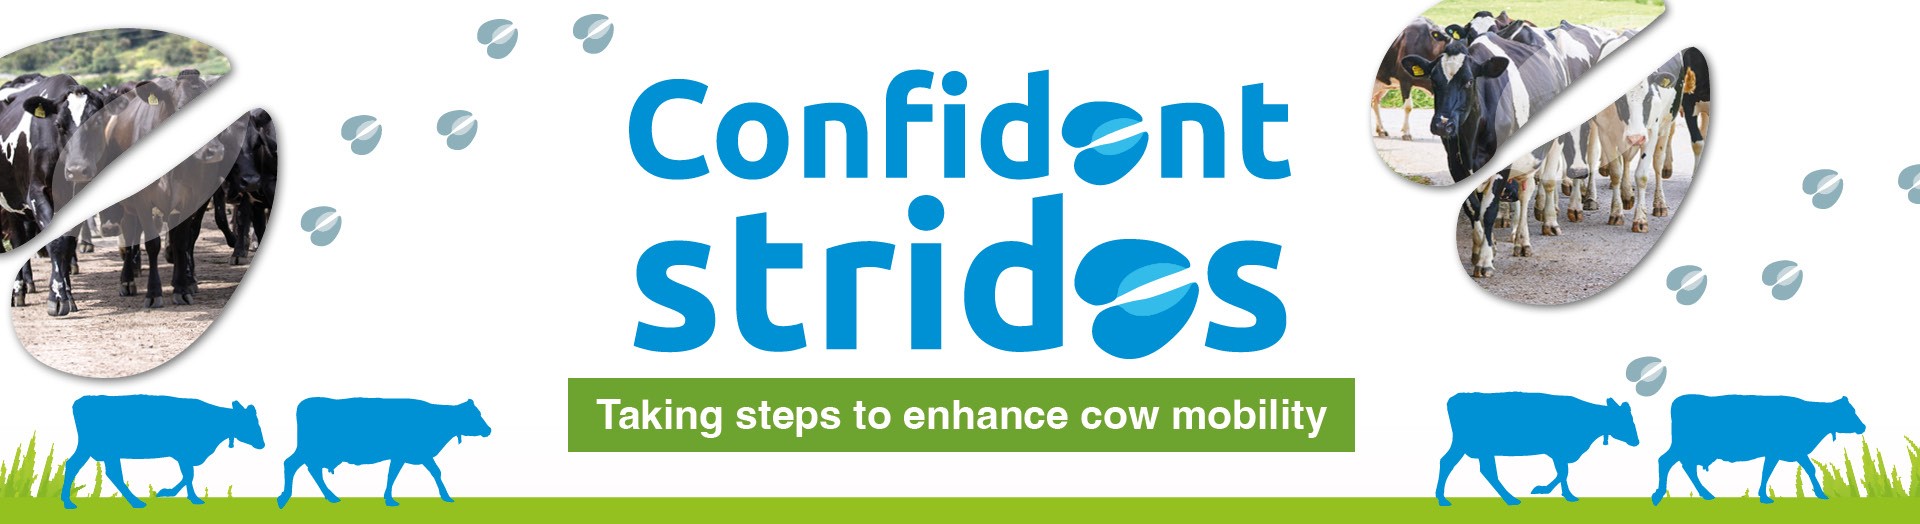 Confident strides: Taking steps to enhance cow mobility